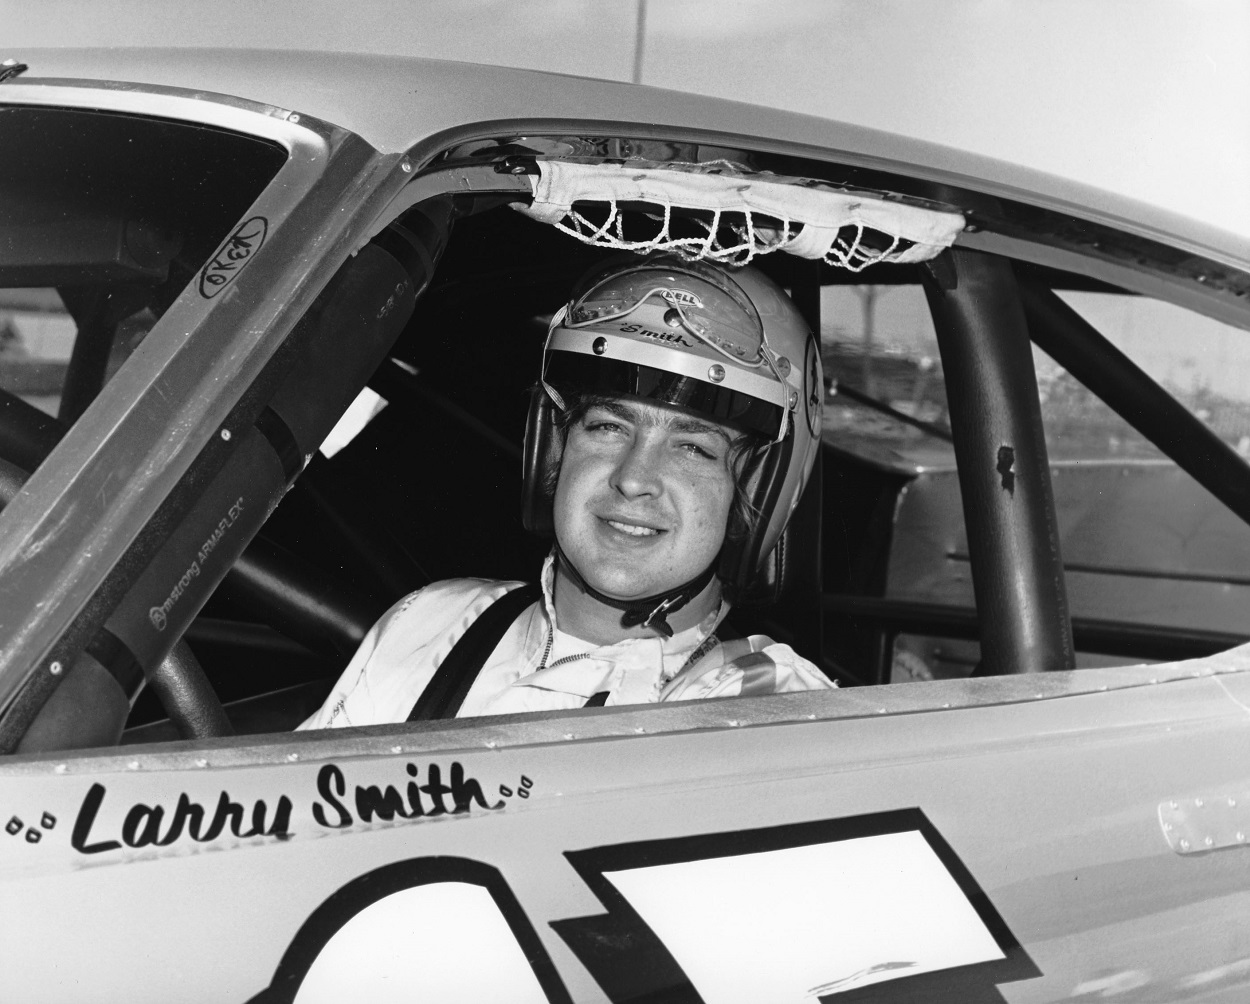 1972 NASCAR Rookie of the Year Larry Smith